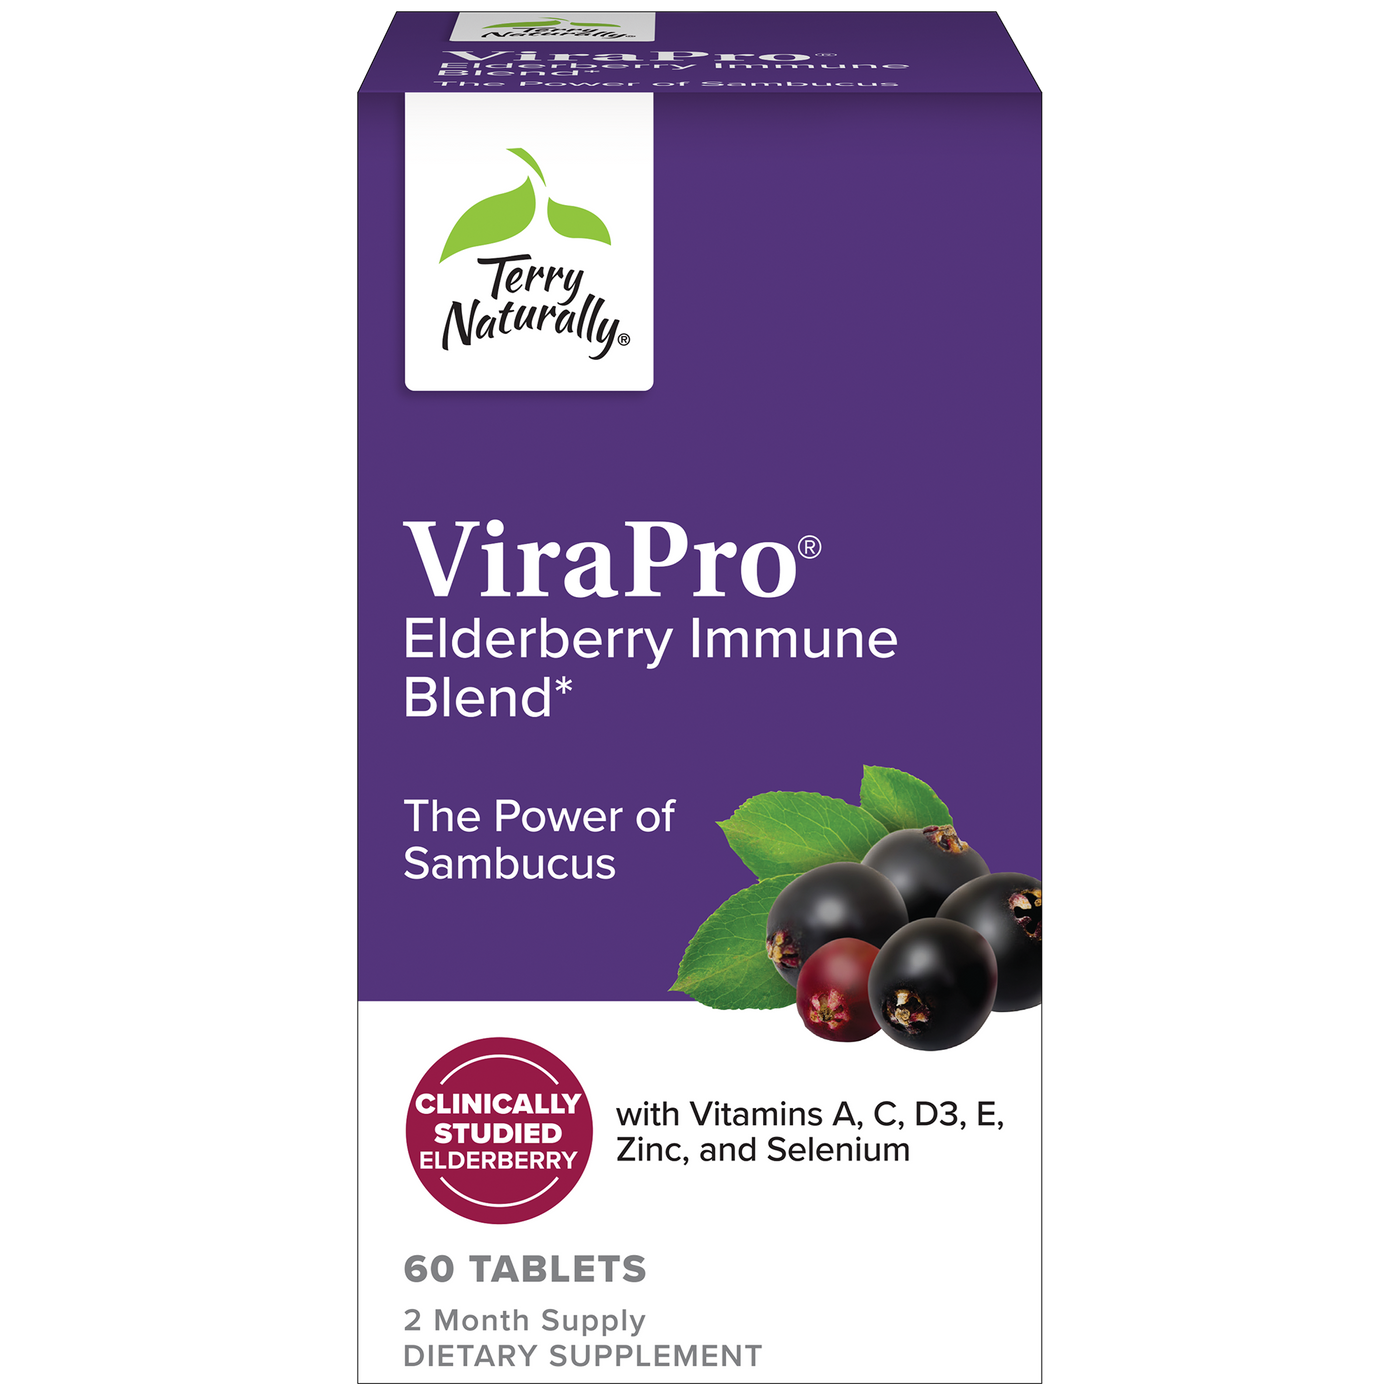 ViraPro 60 Tablets Curated Wellness